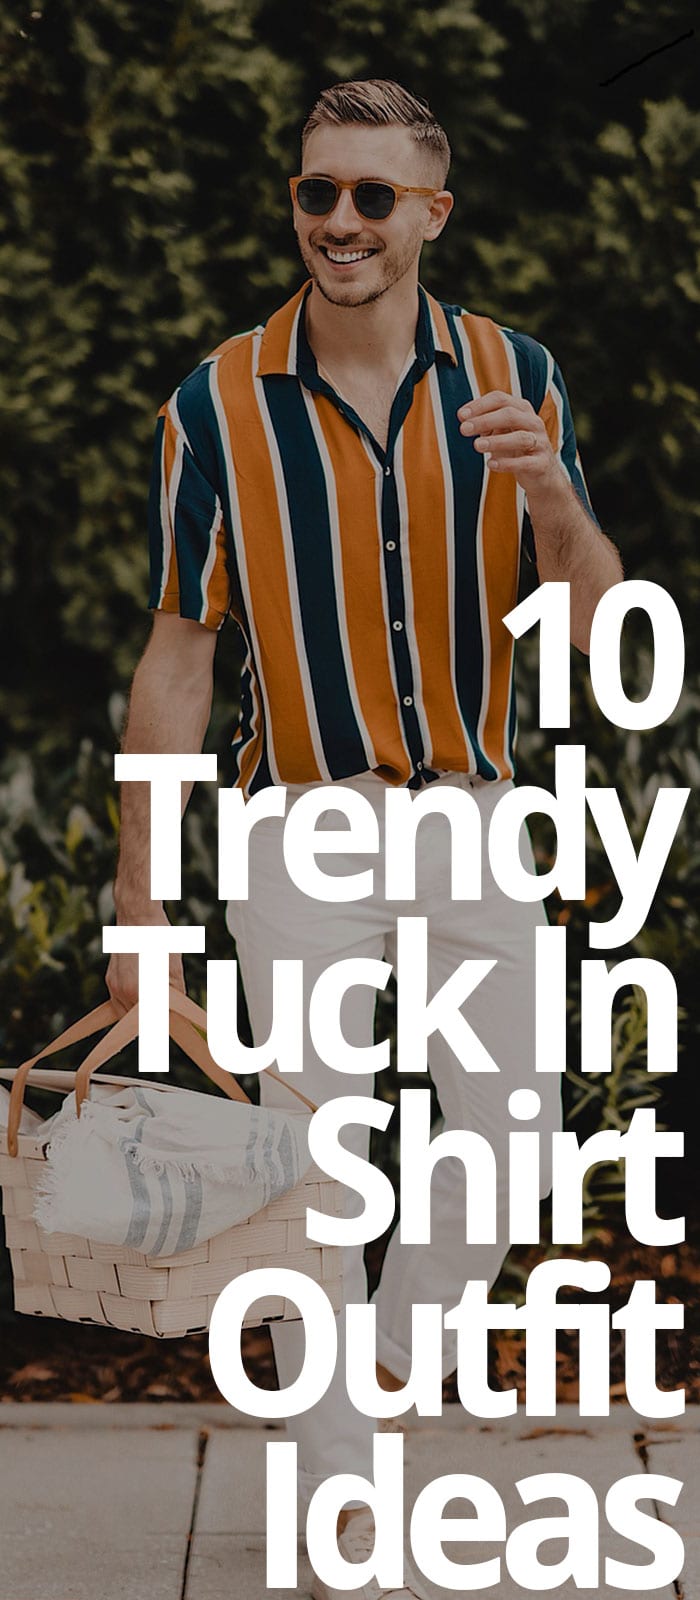 10 Trendy Tuck In Shirt Outfit Ideas.